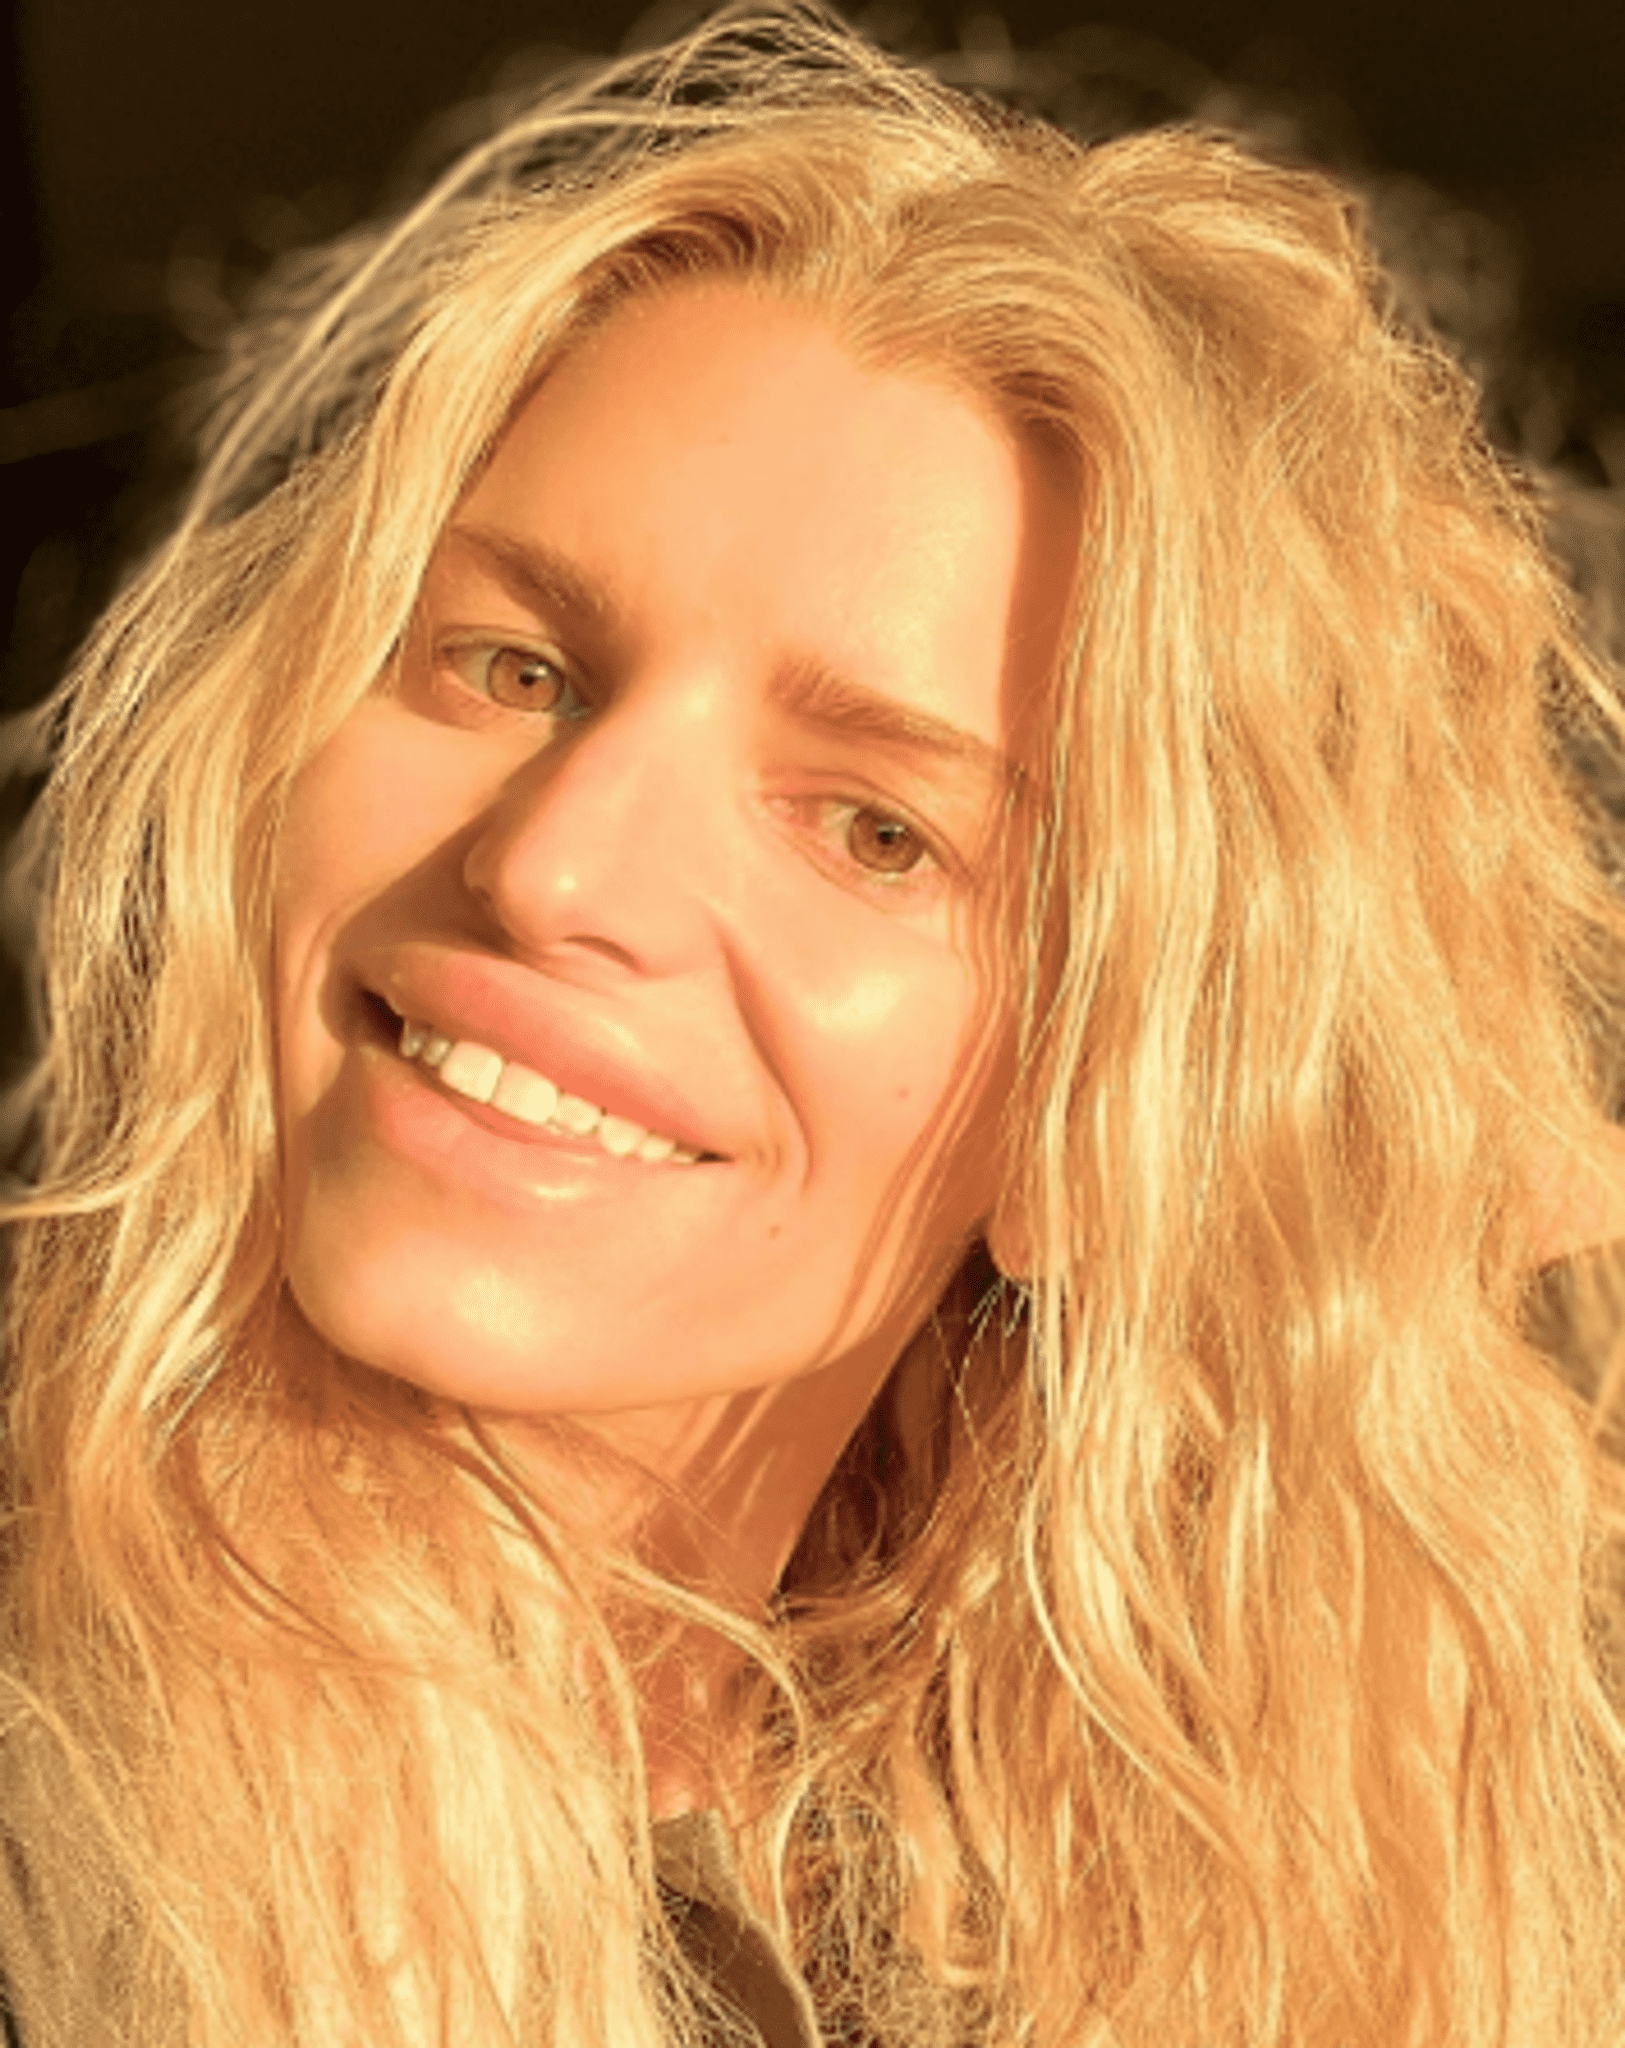 jessica-simpson-shared-with-fans-a-selfie-without-makeup